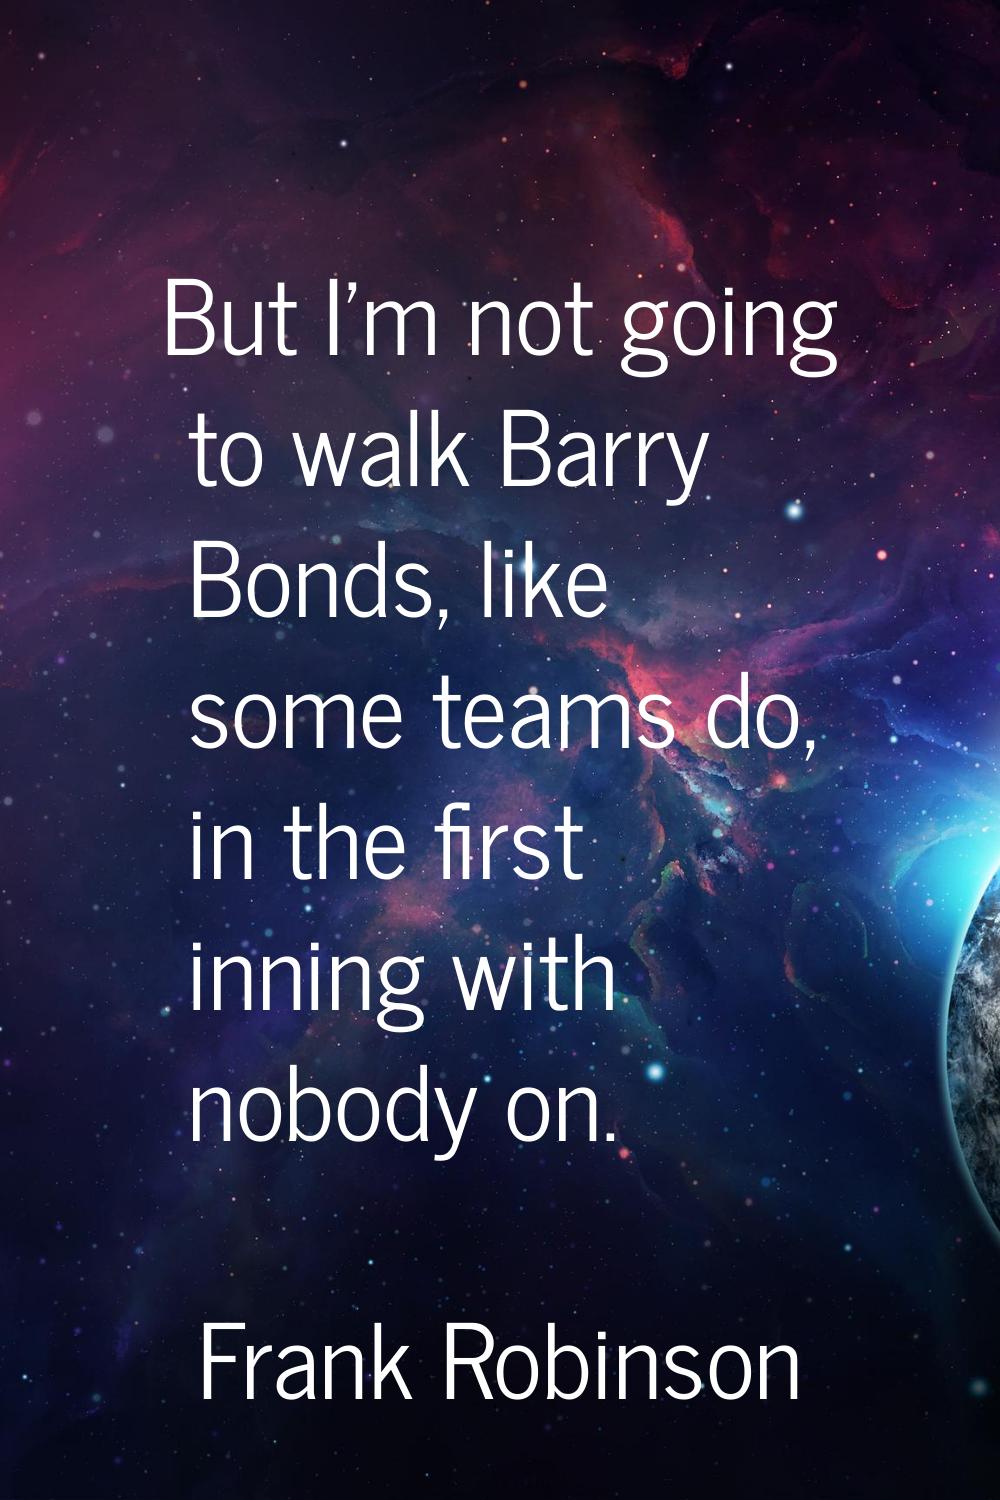 But I'm not going to walk Barry Bonds, like some teams do, in the first inning with nobody on.